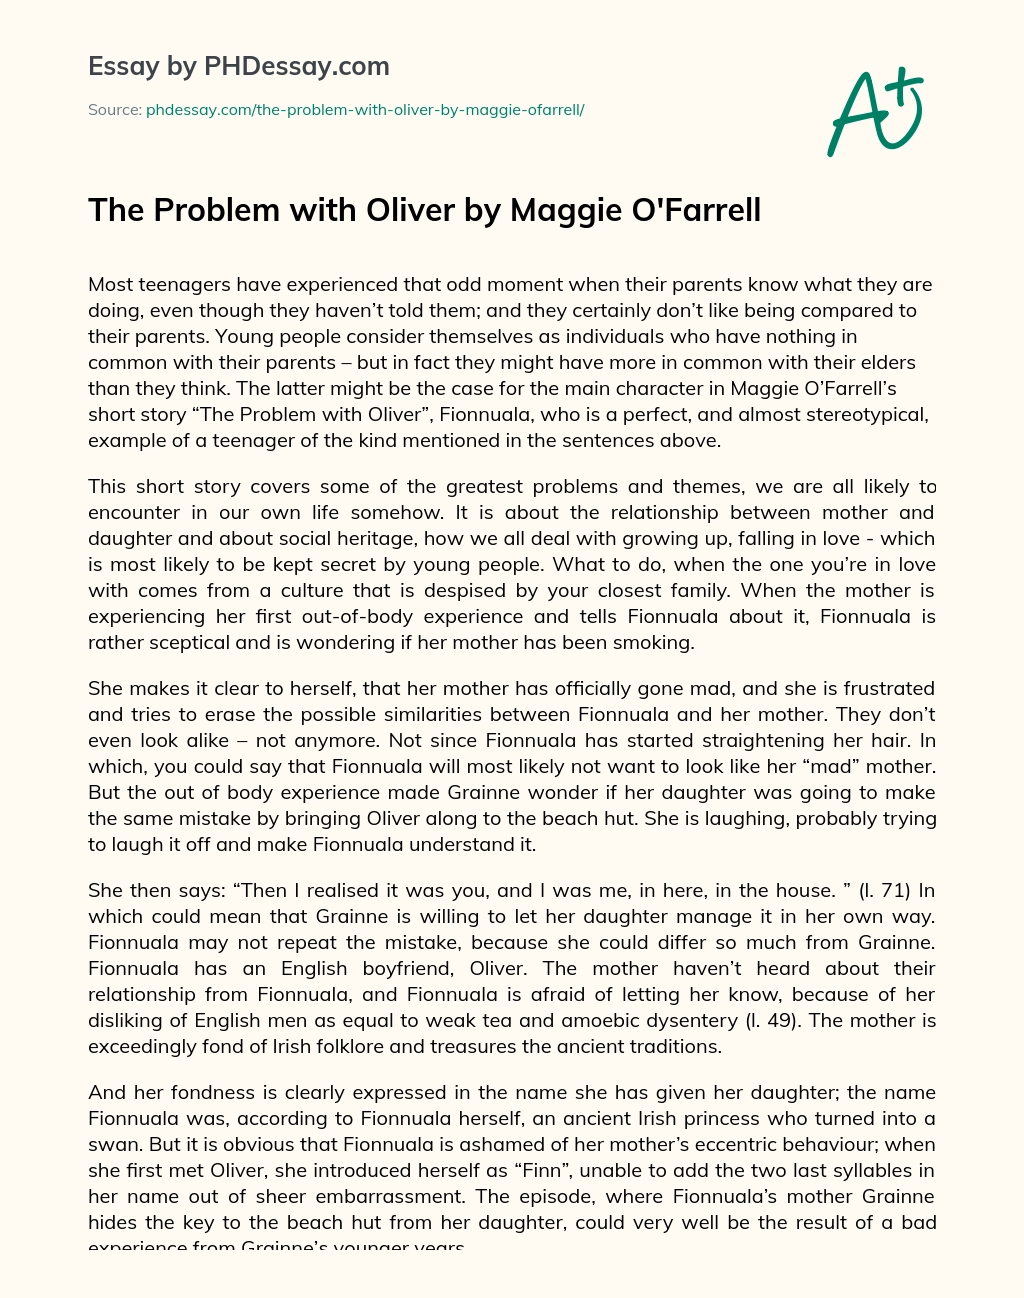 The Problem with Oliver by Maggie O’Farrell essay